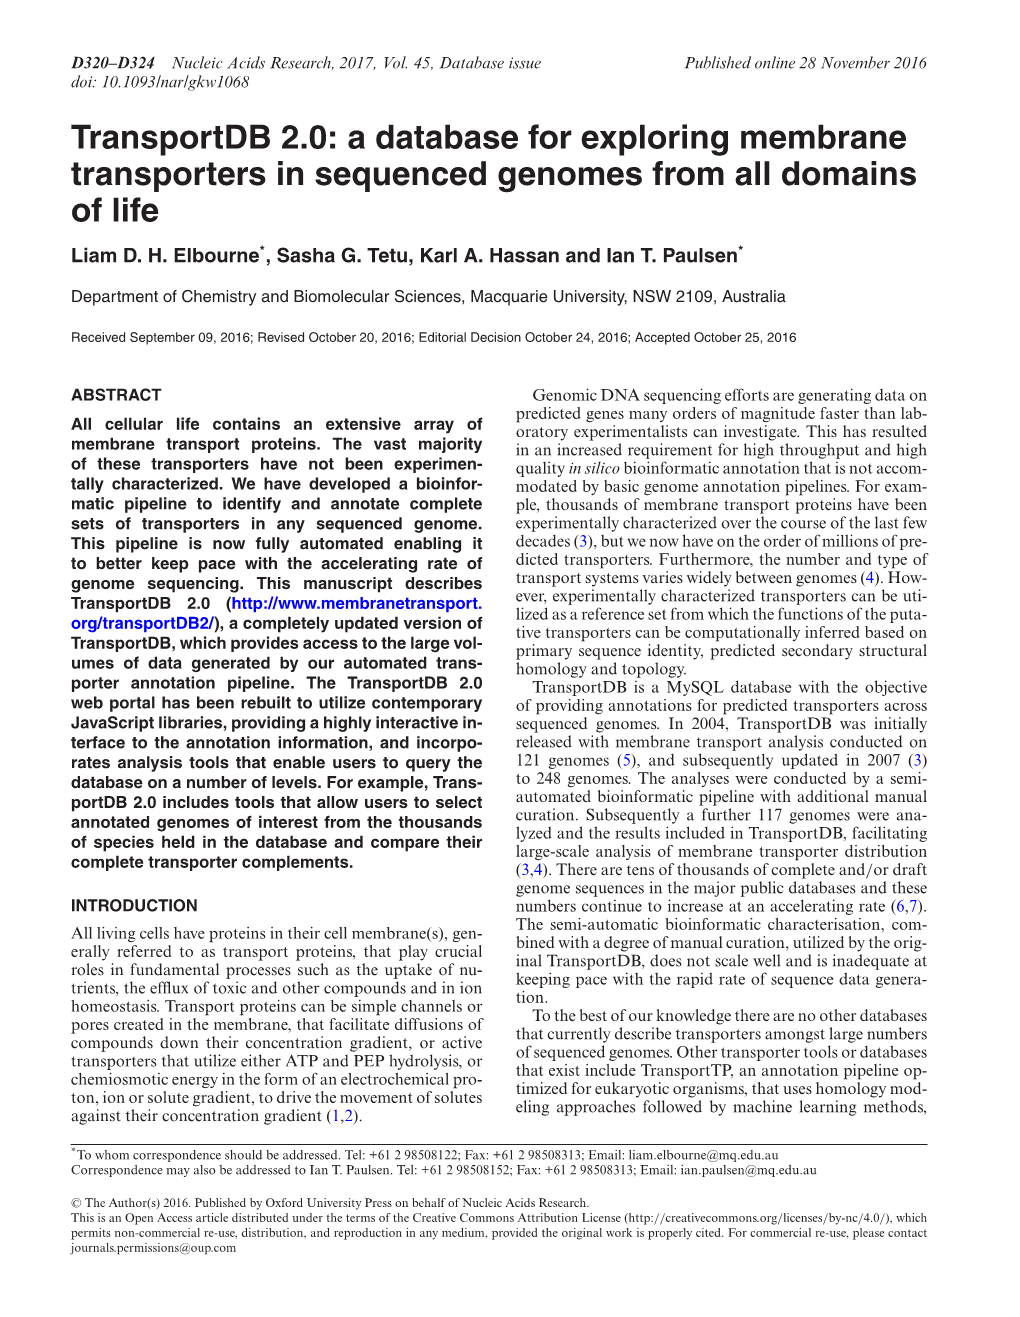 Transportdb 2.0: a Database for Exploring Membrane Transporters in Sequenced Genomes from All Domains of Life Liam D